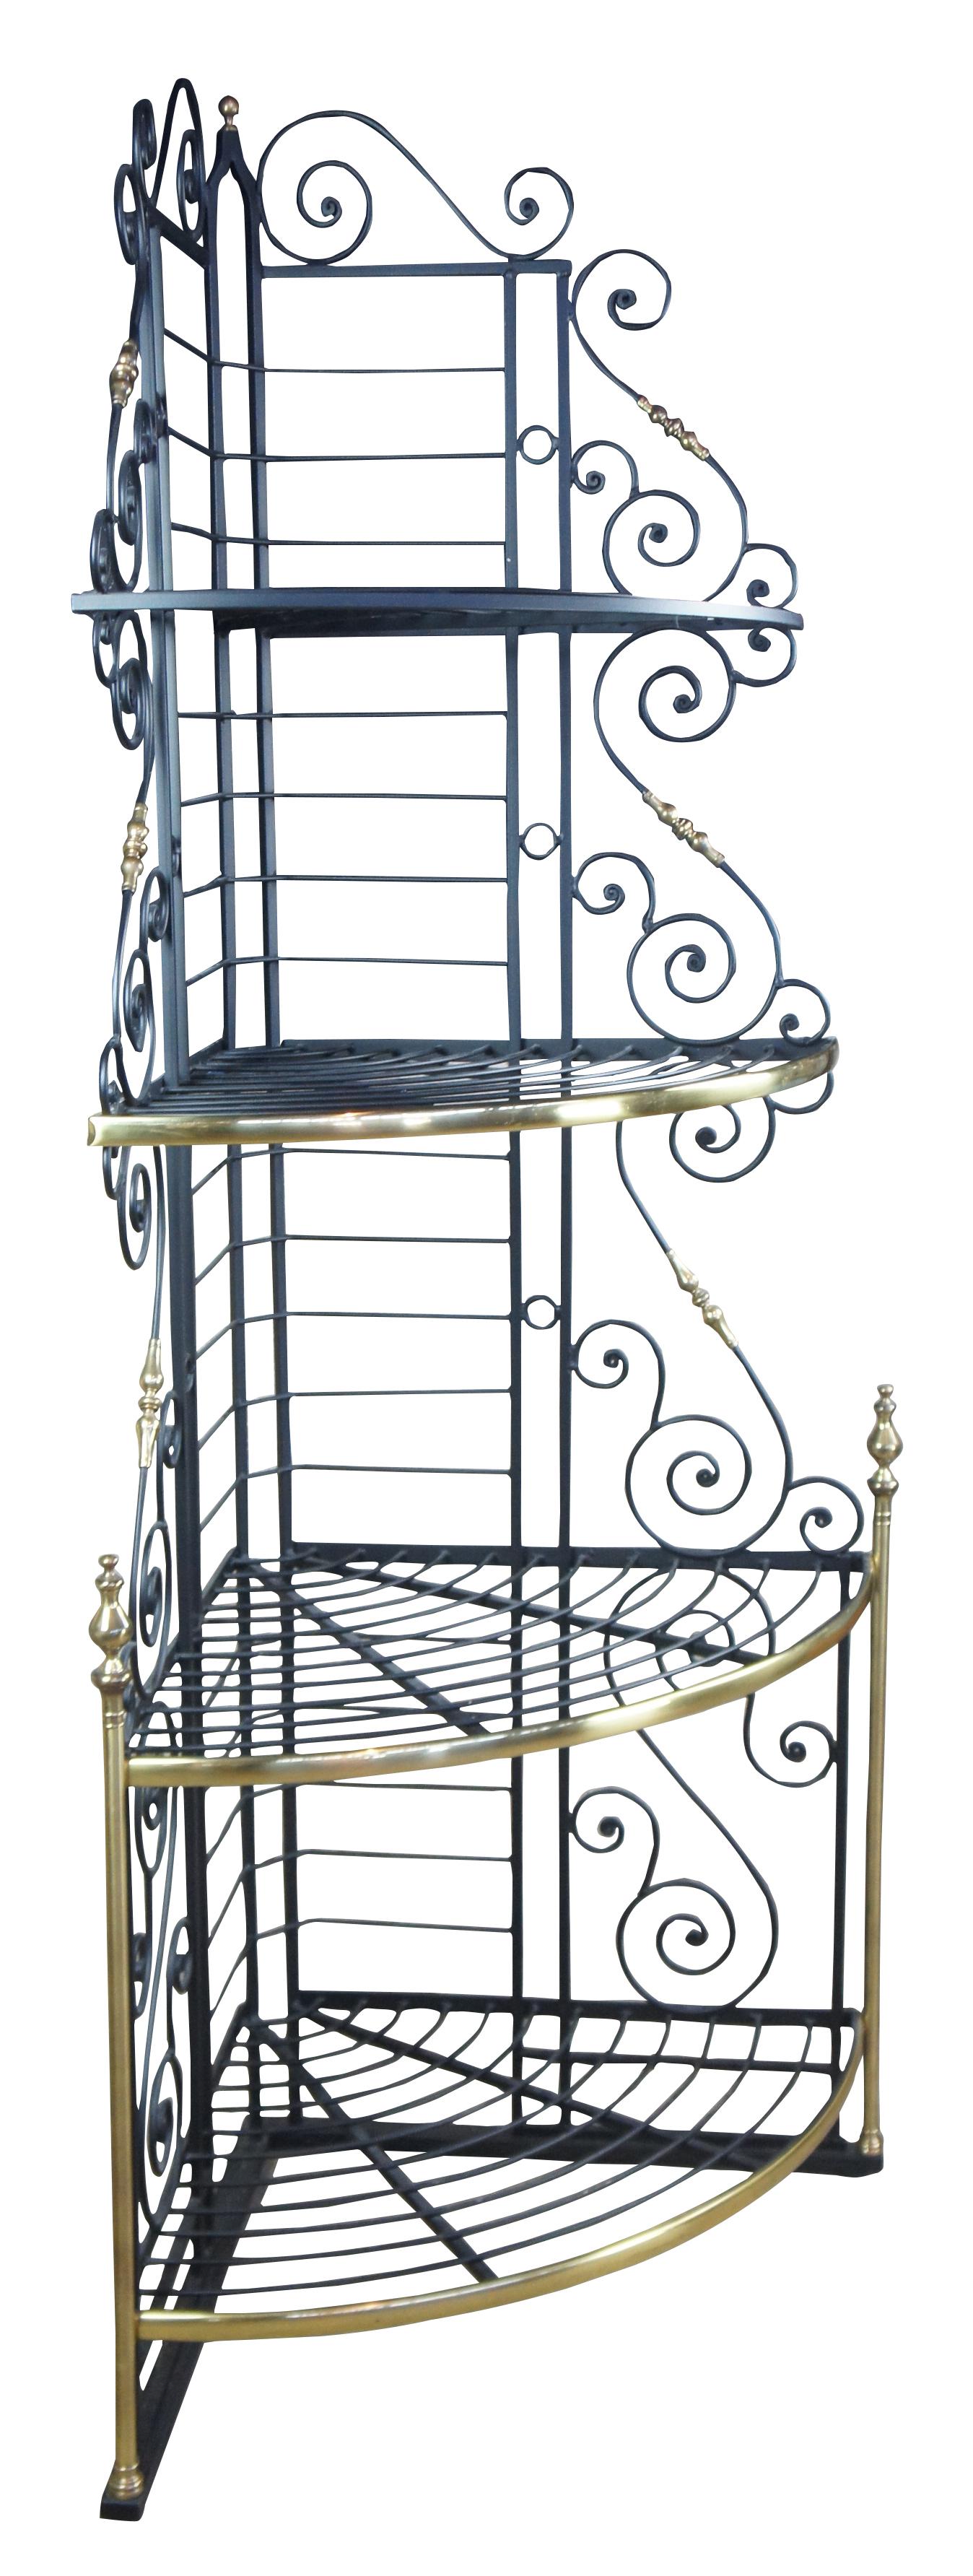 Vintage scrolled iron and brass corner bakers rack French étagère shelf 88